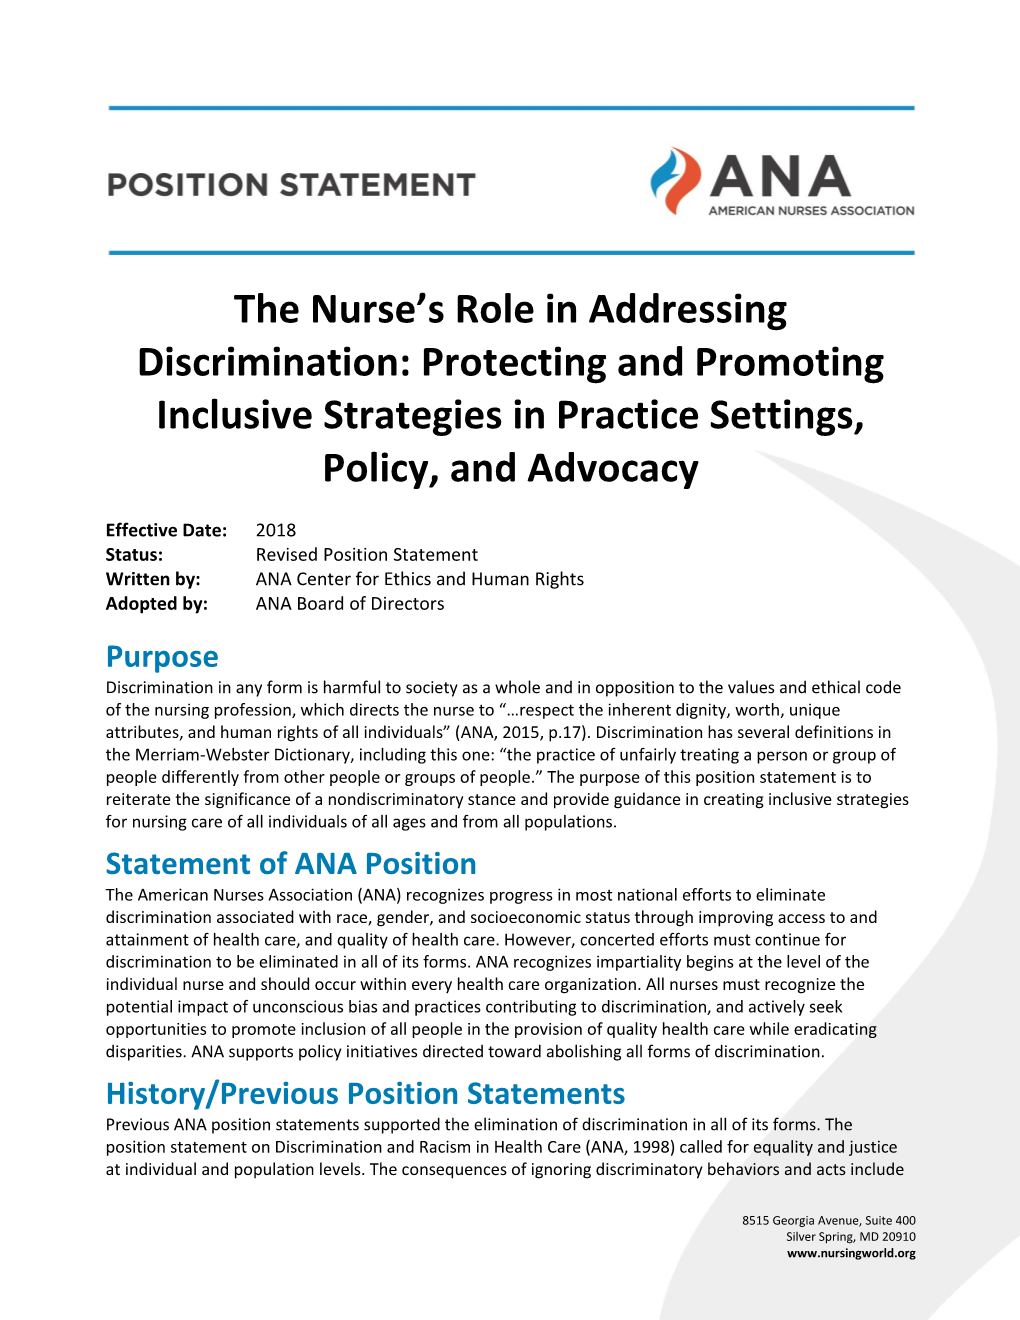 The Nurse's Role in Addressing Discrimination: Protecting and Promoting Inclusive Strategies in Practice Settings, Policy